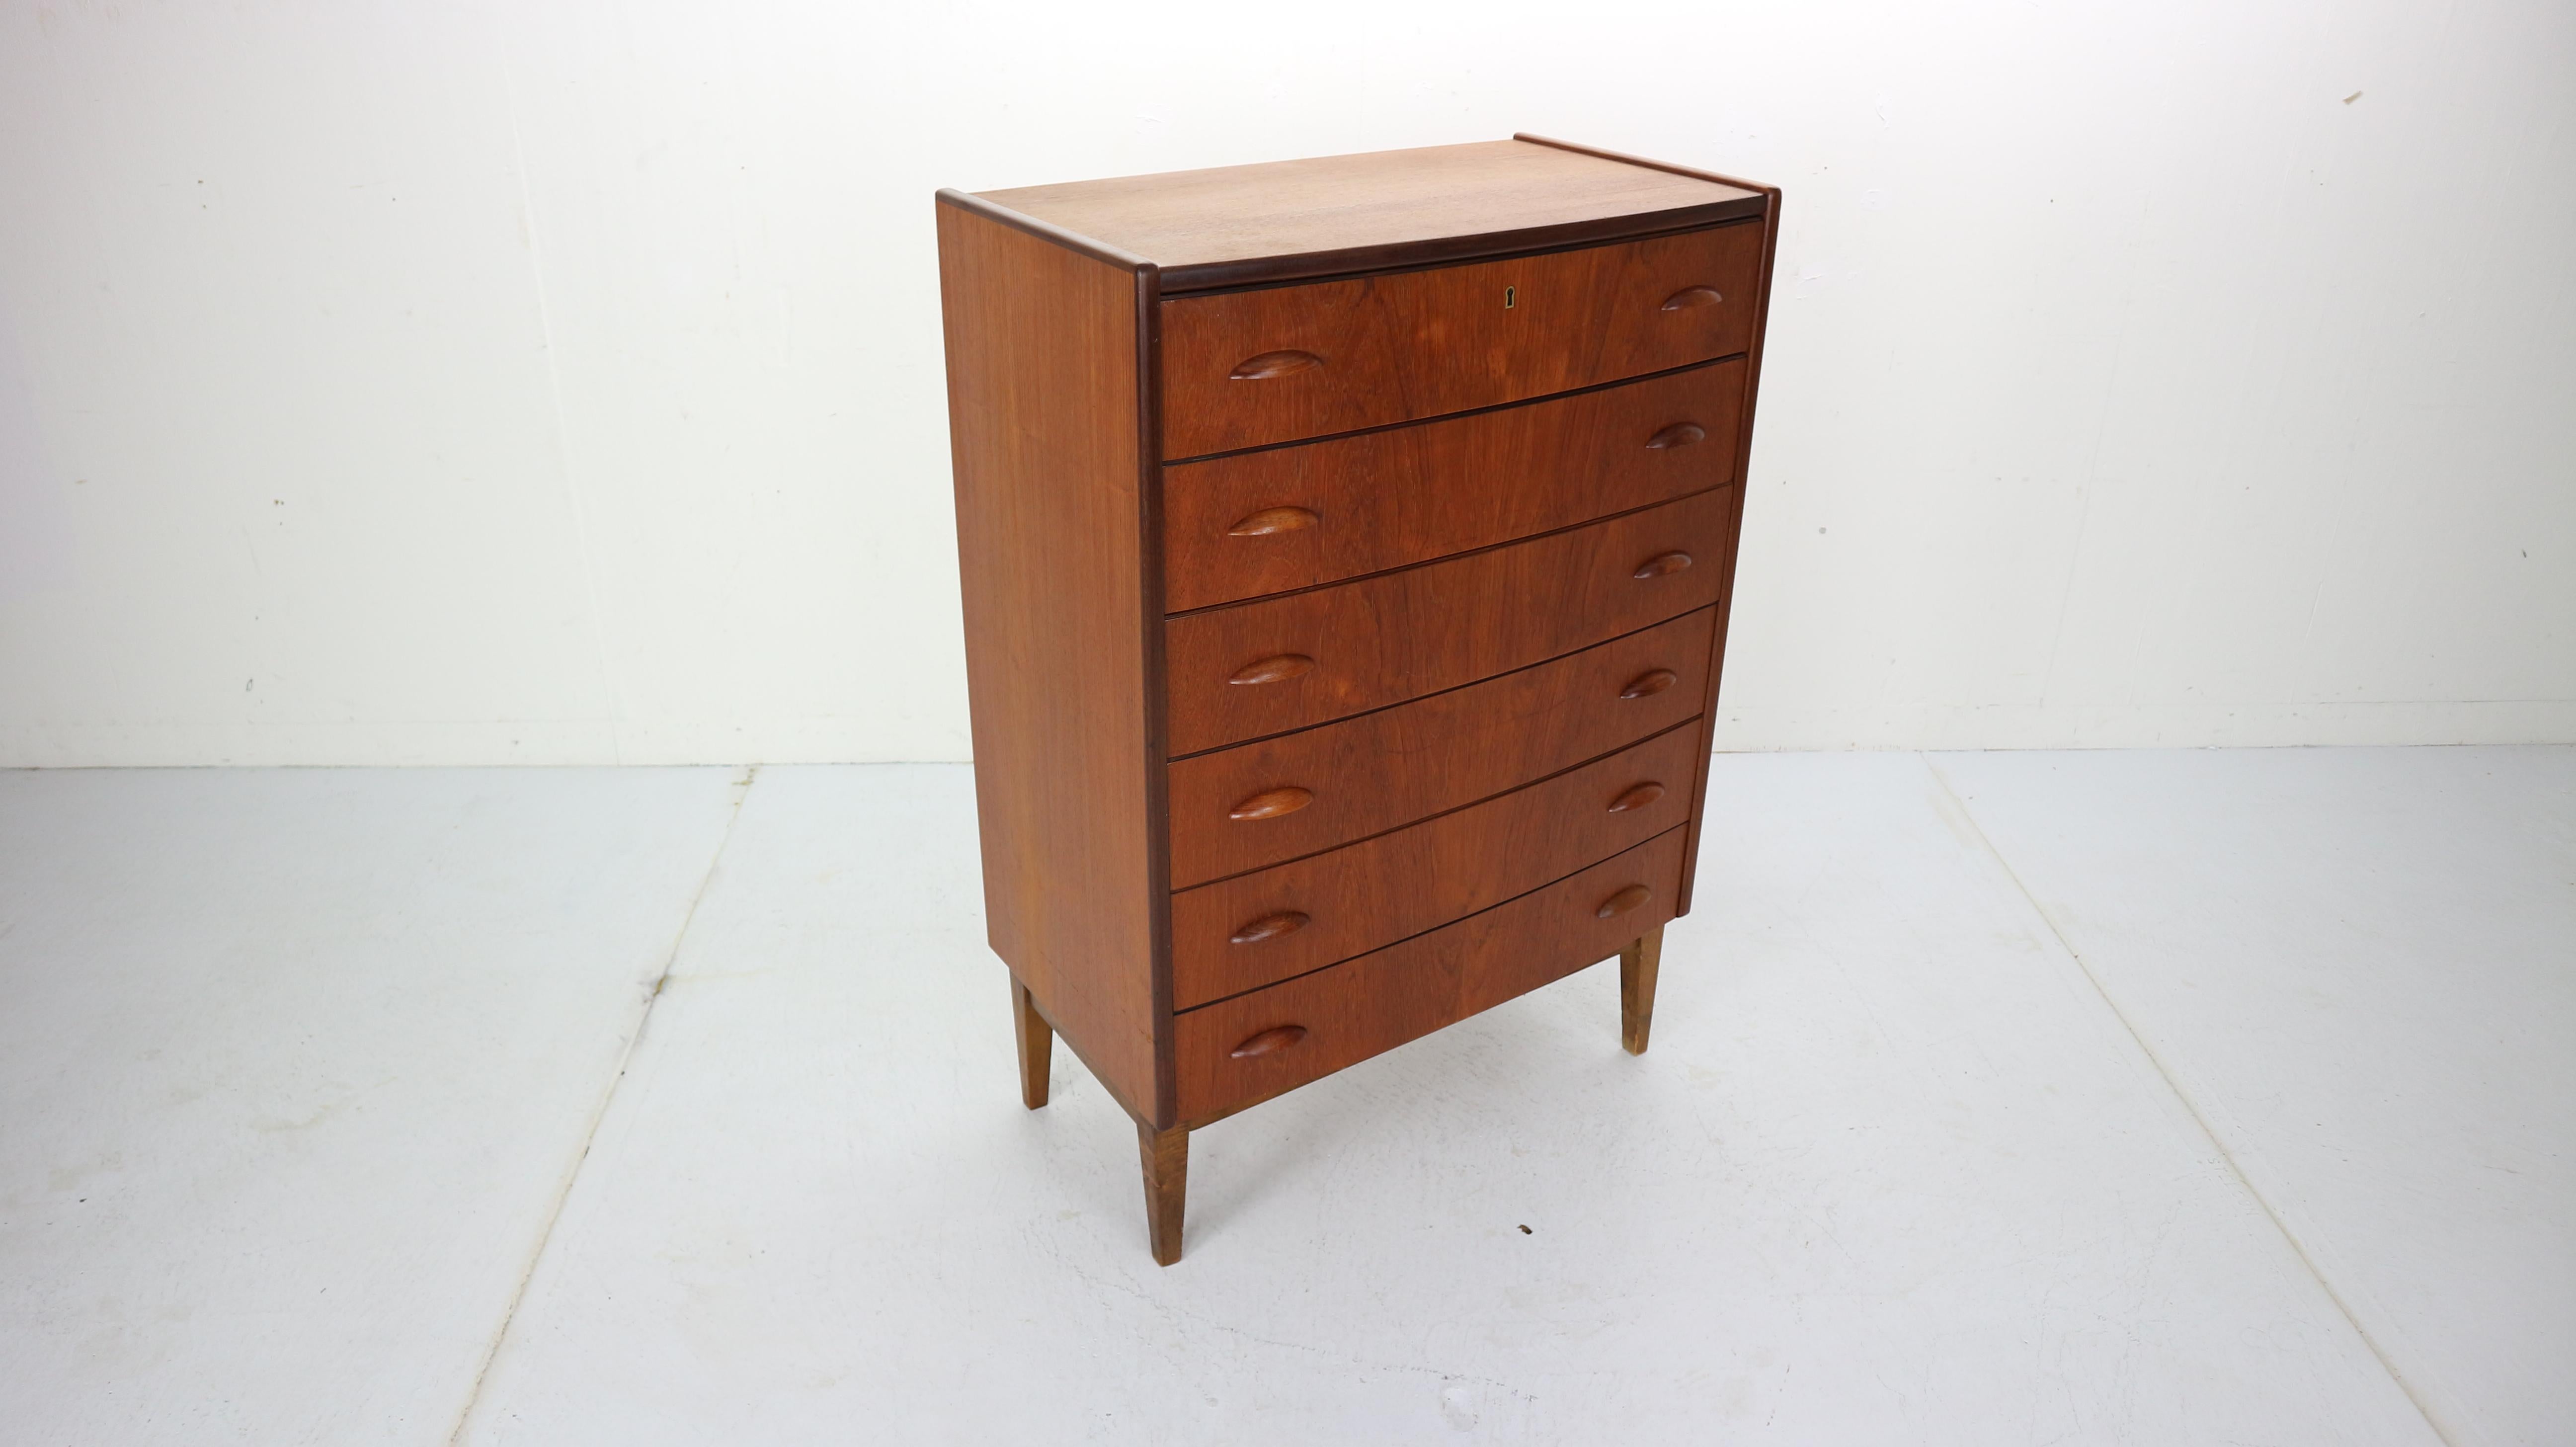 This midcentury Danish design chest of 6 drawers, tallboy in teak was made in Denmark in the 1960s period.
Beautiful minimalistic handles of both sides of the drawers.
Curved shape cabinet is an elegant storage space for your vintage and modern